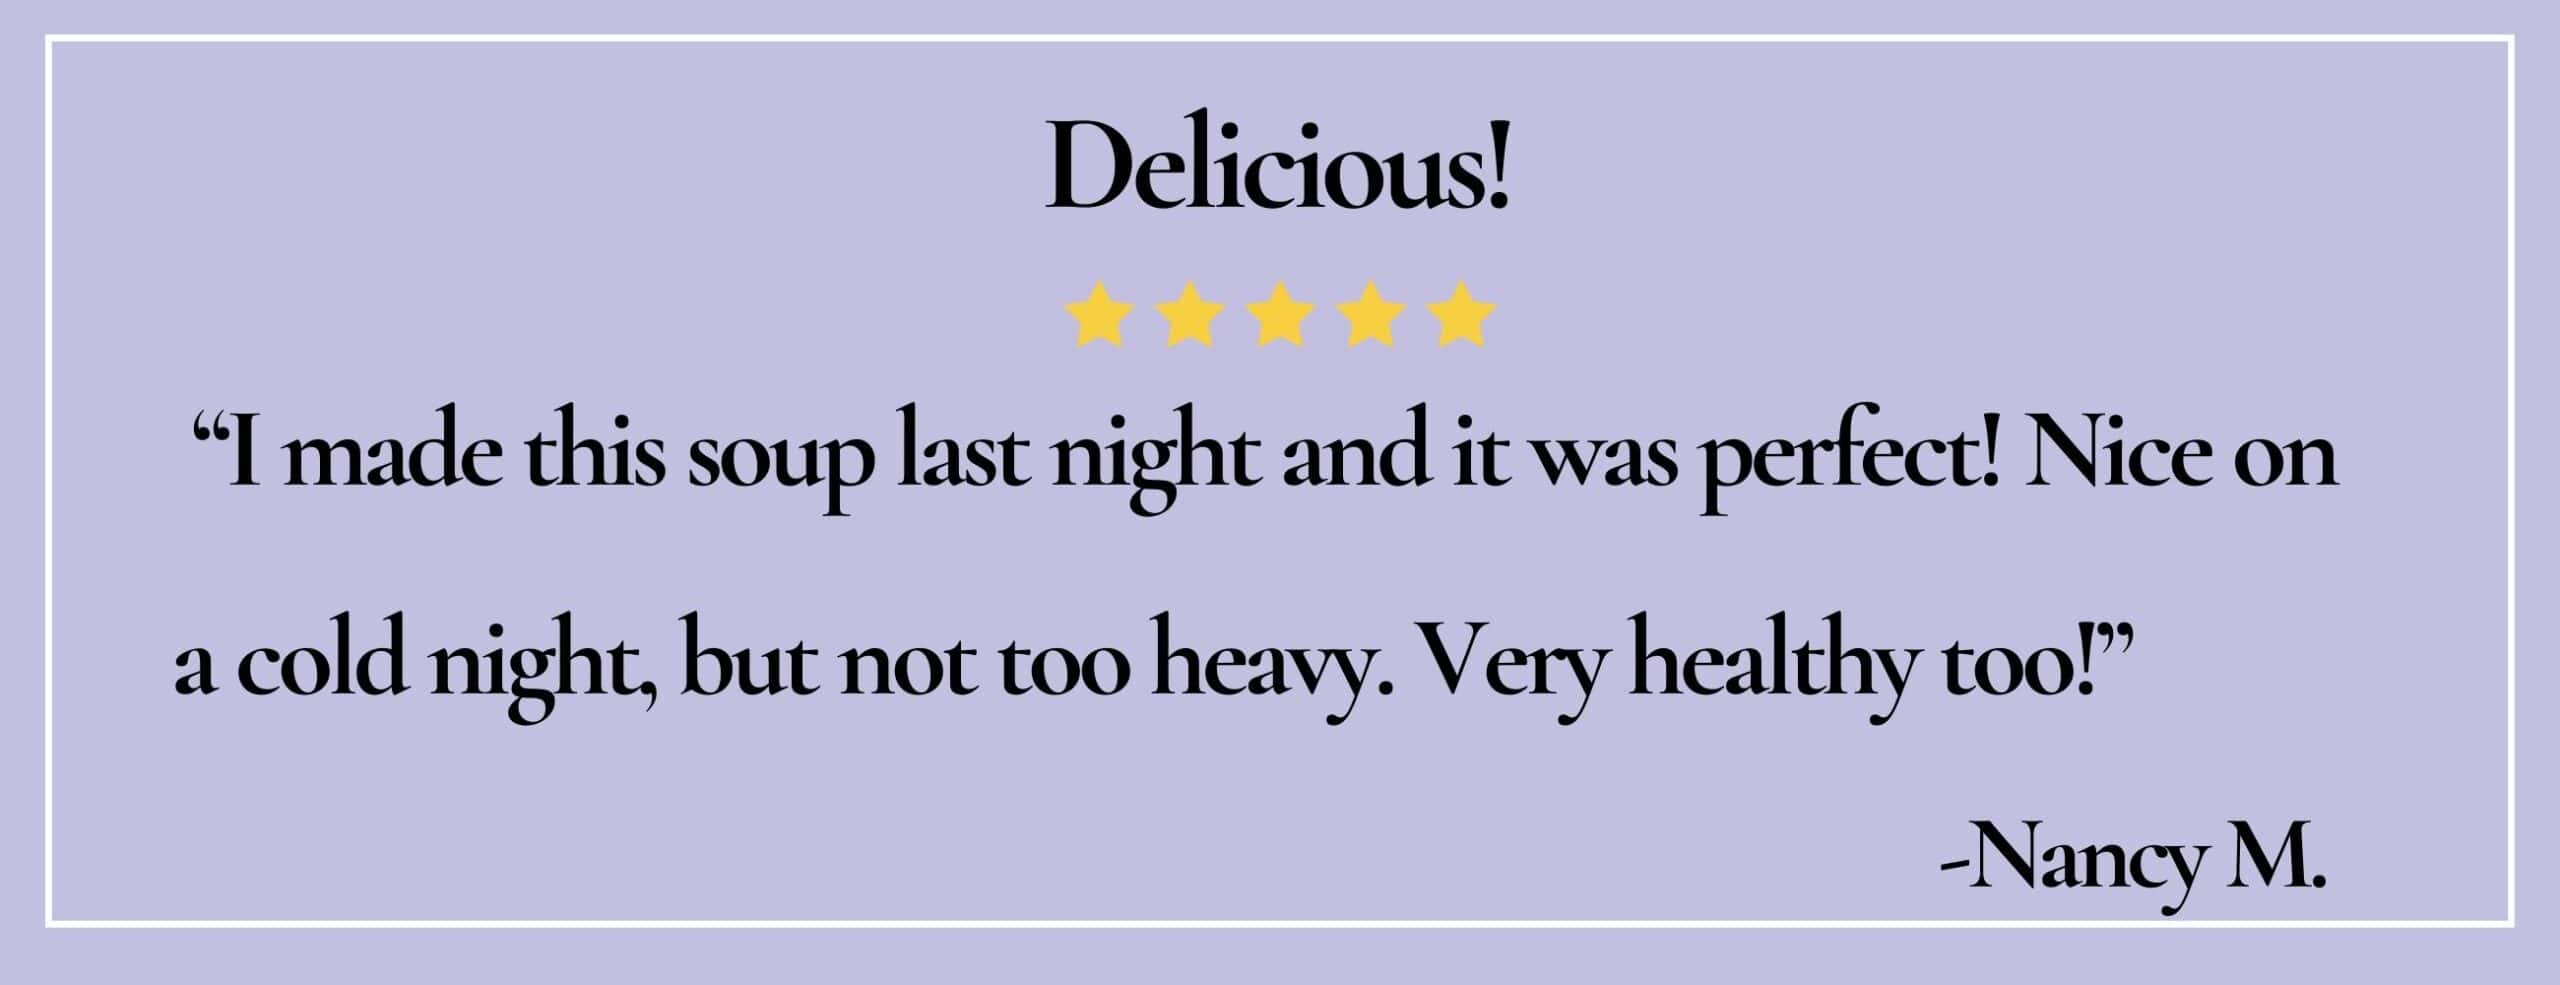 text box with paraphrase: I made this soup... Nice on a cold night, but not too heavy. Very healthy too! -Nancy M.